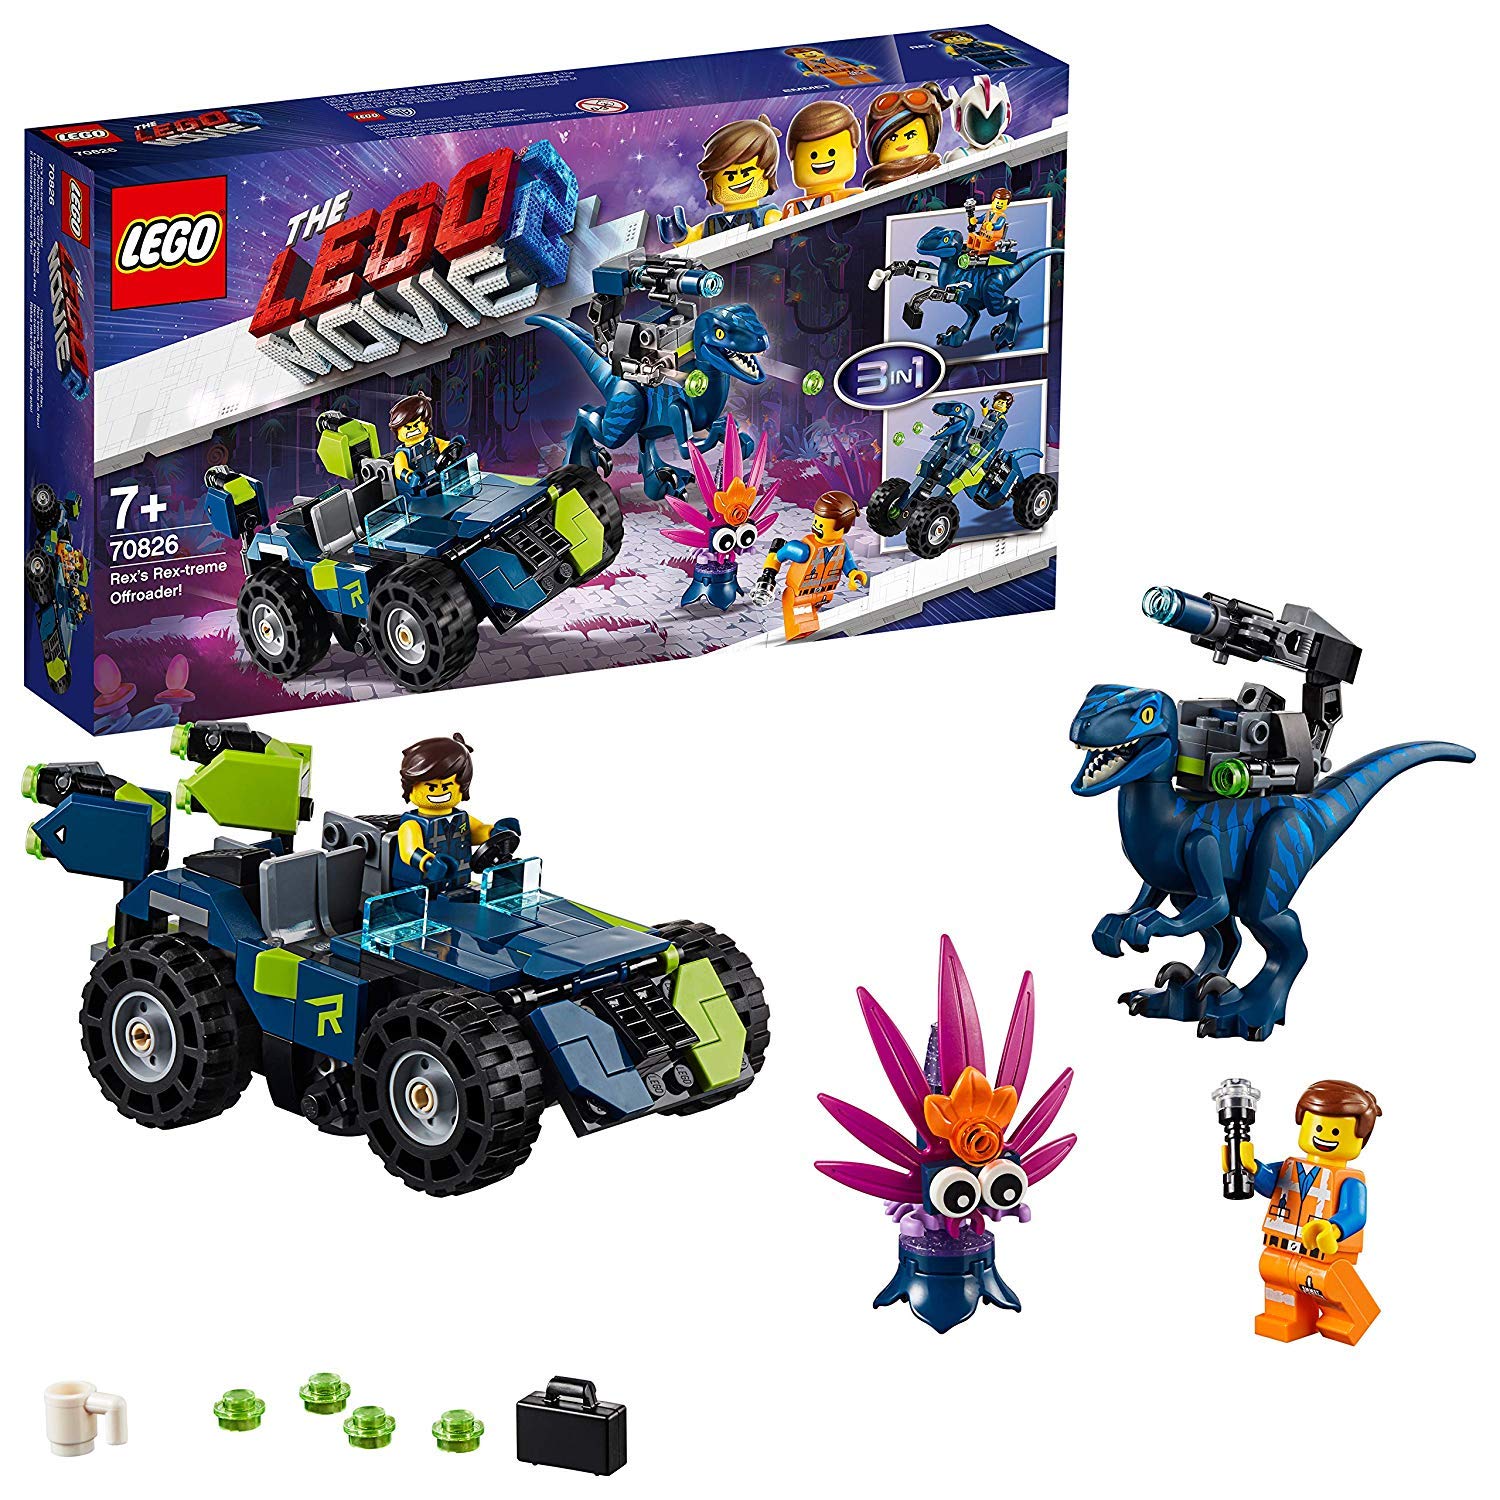 The Lego Movie 2, 70826, Rex "Rextremes" Offroad Vehicle